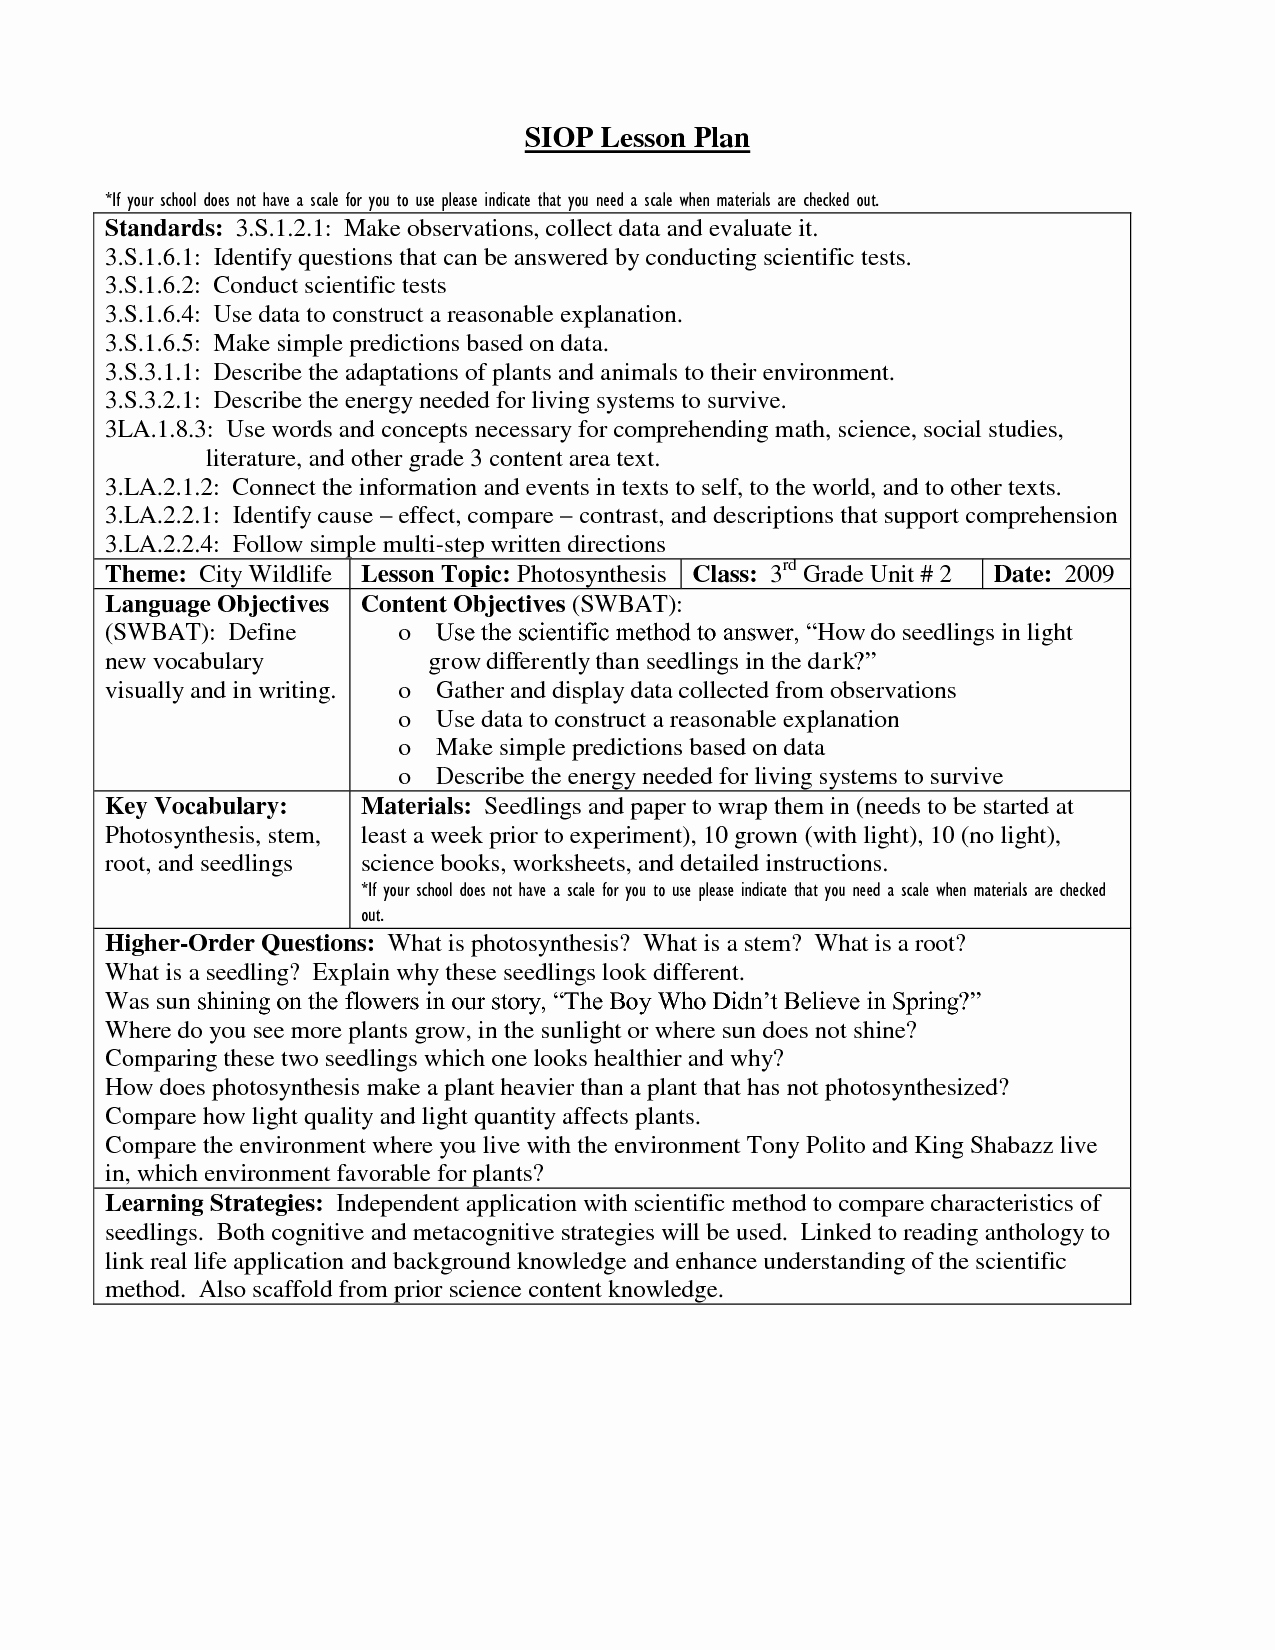 Siop Lesson Plan Template 2 Elegant 16 Awesome Siop Lesson Plan Template 2 Example